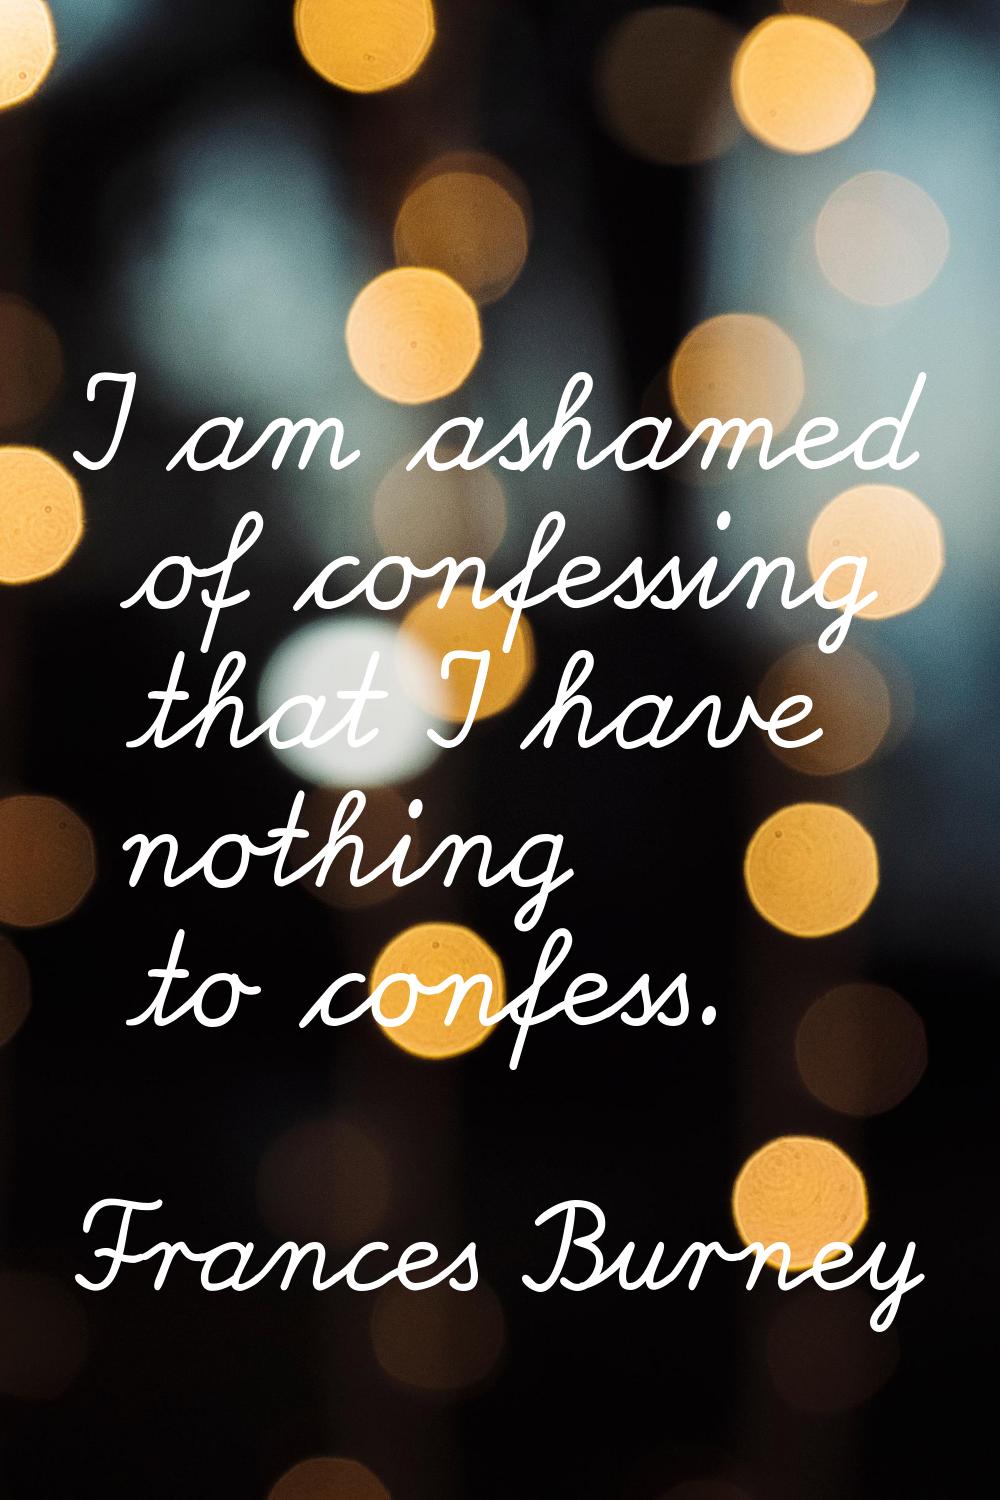 I am ashamed of confessing that I have nothing to confess.